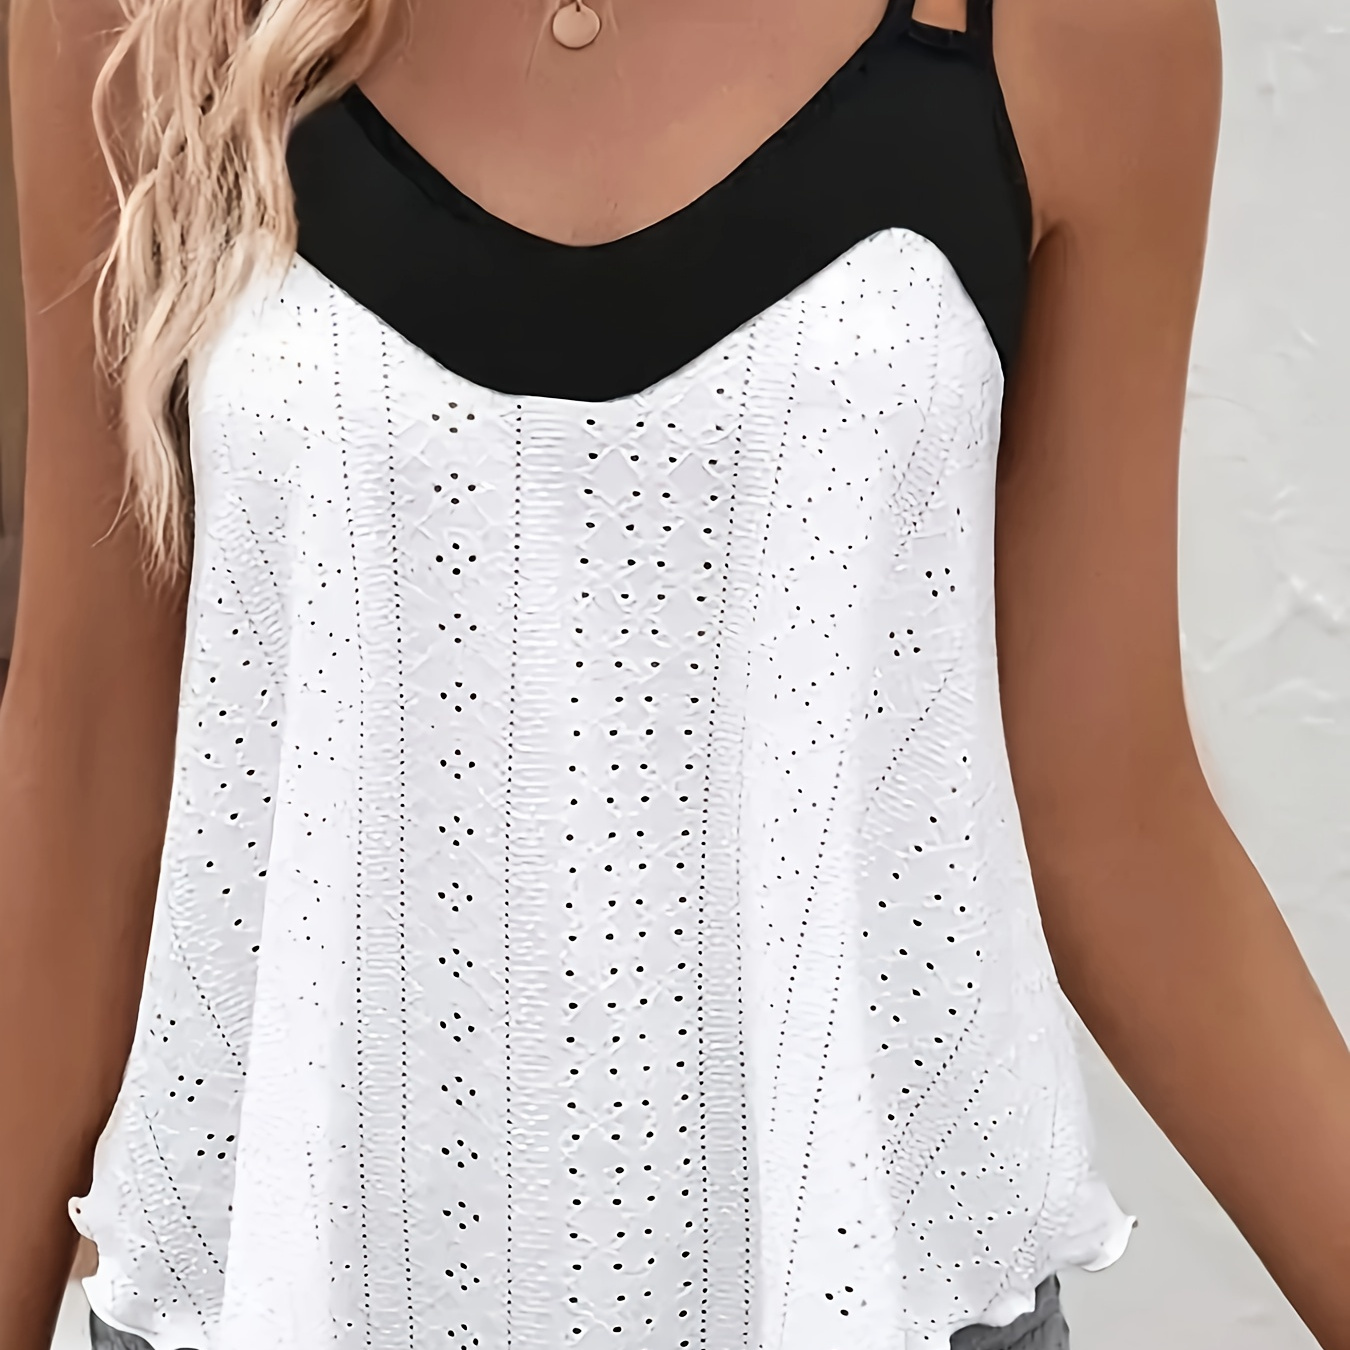 

Color Block Eyelet Double Strap Top, Casual Sleeveless Lettuce Trim Cami Top For Summer, Women's Clothing